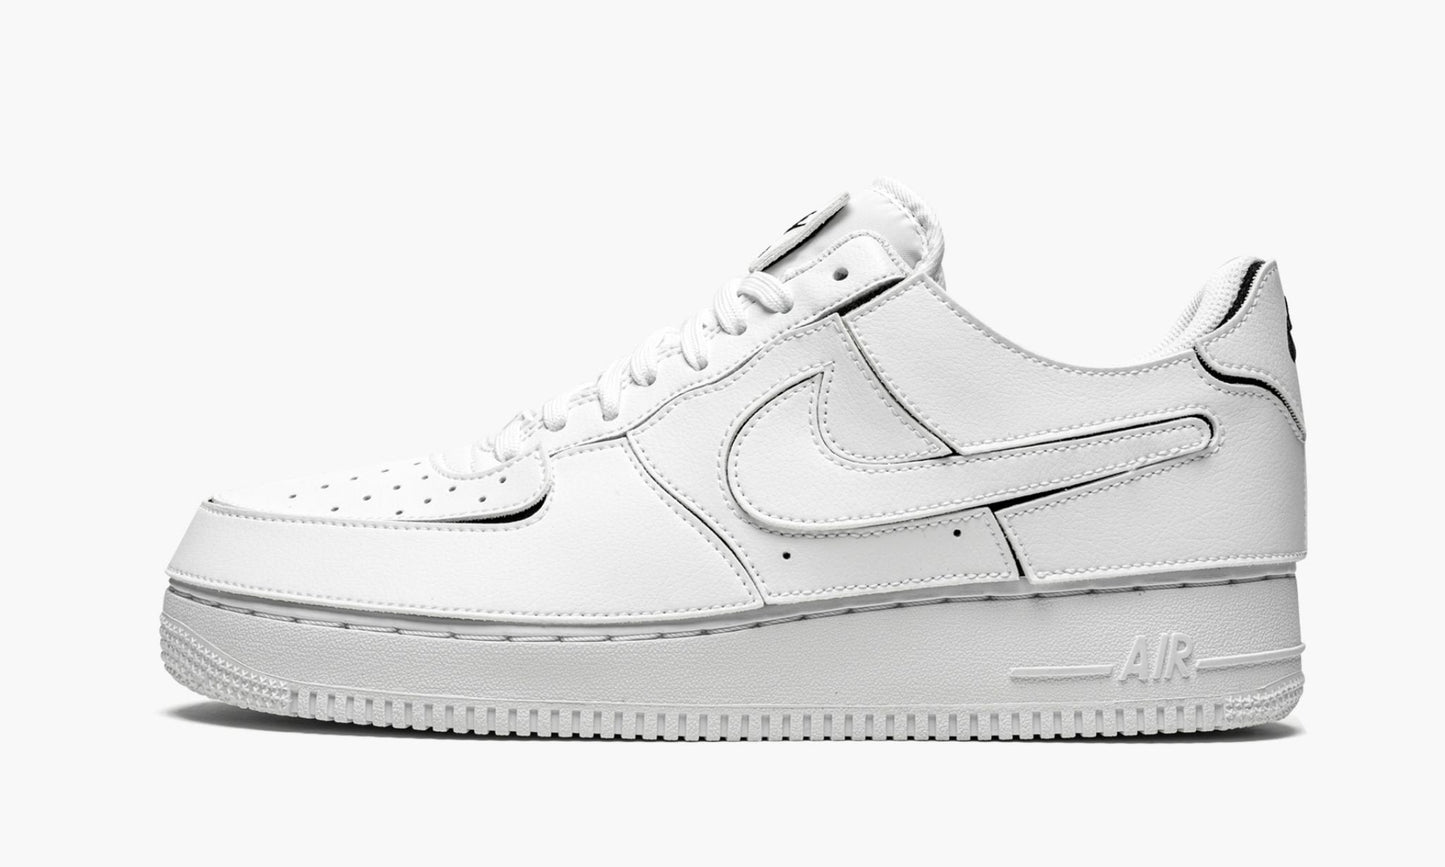 Air Force 1/1 "Cosmic Clay"